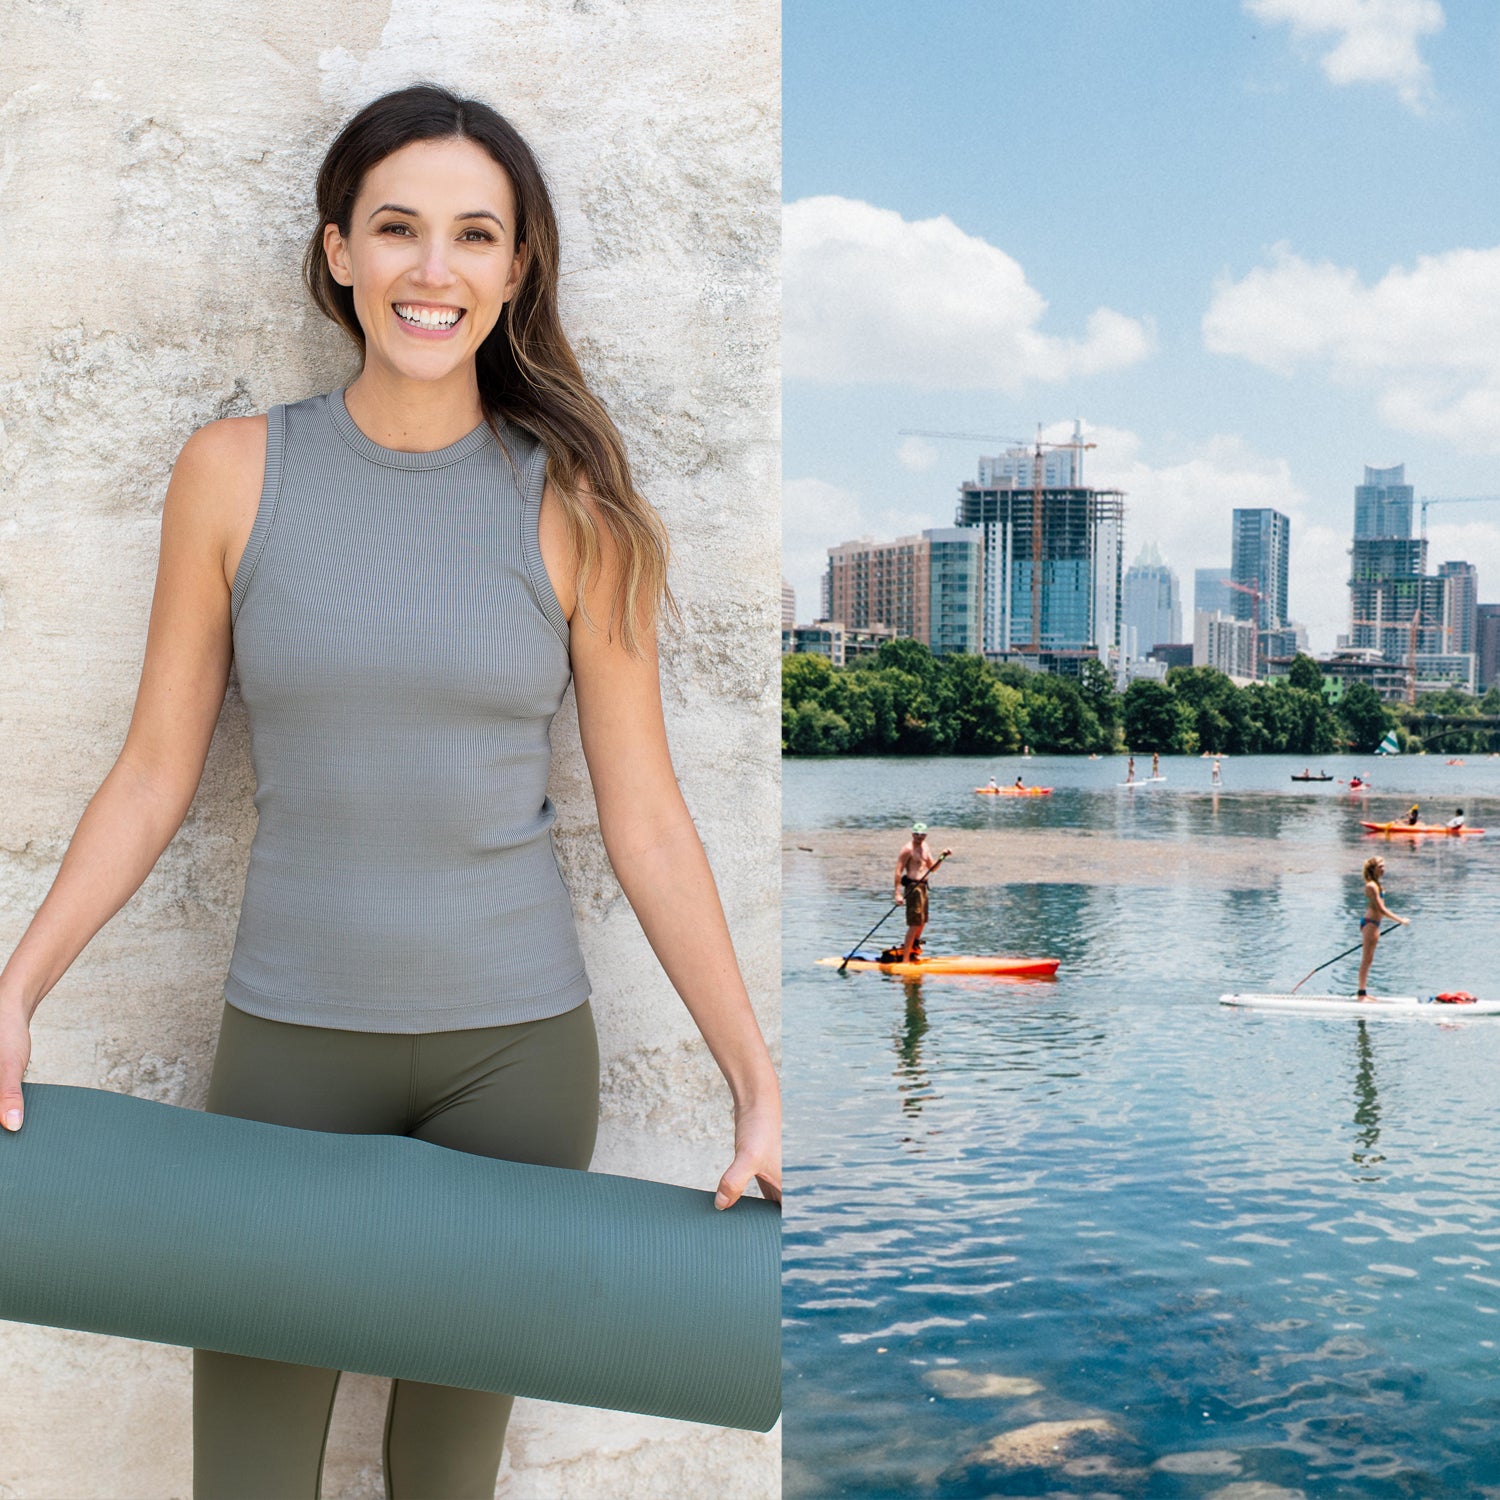 Yoga With Adriene's Guide to Austin